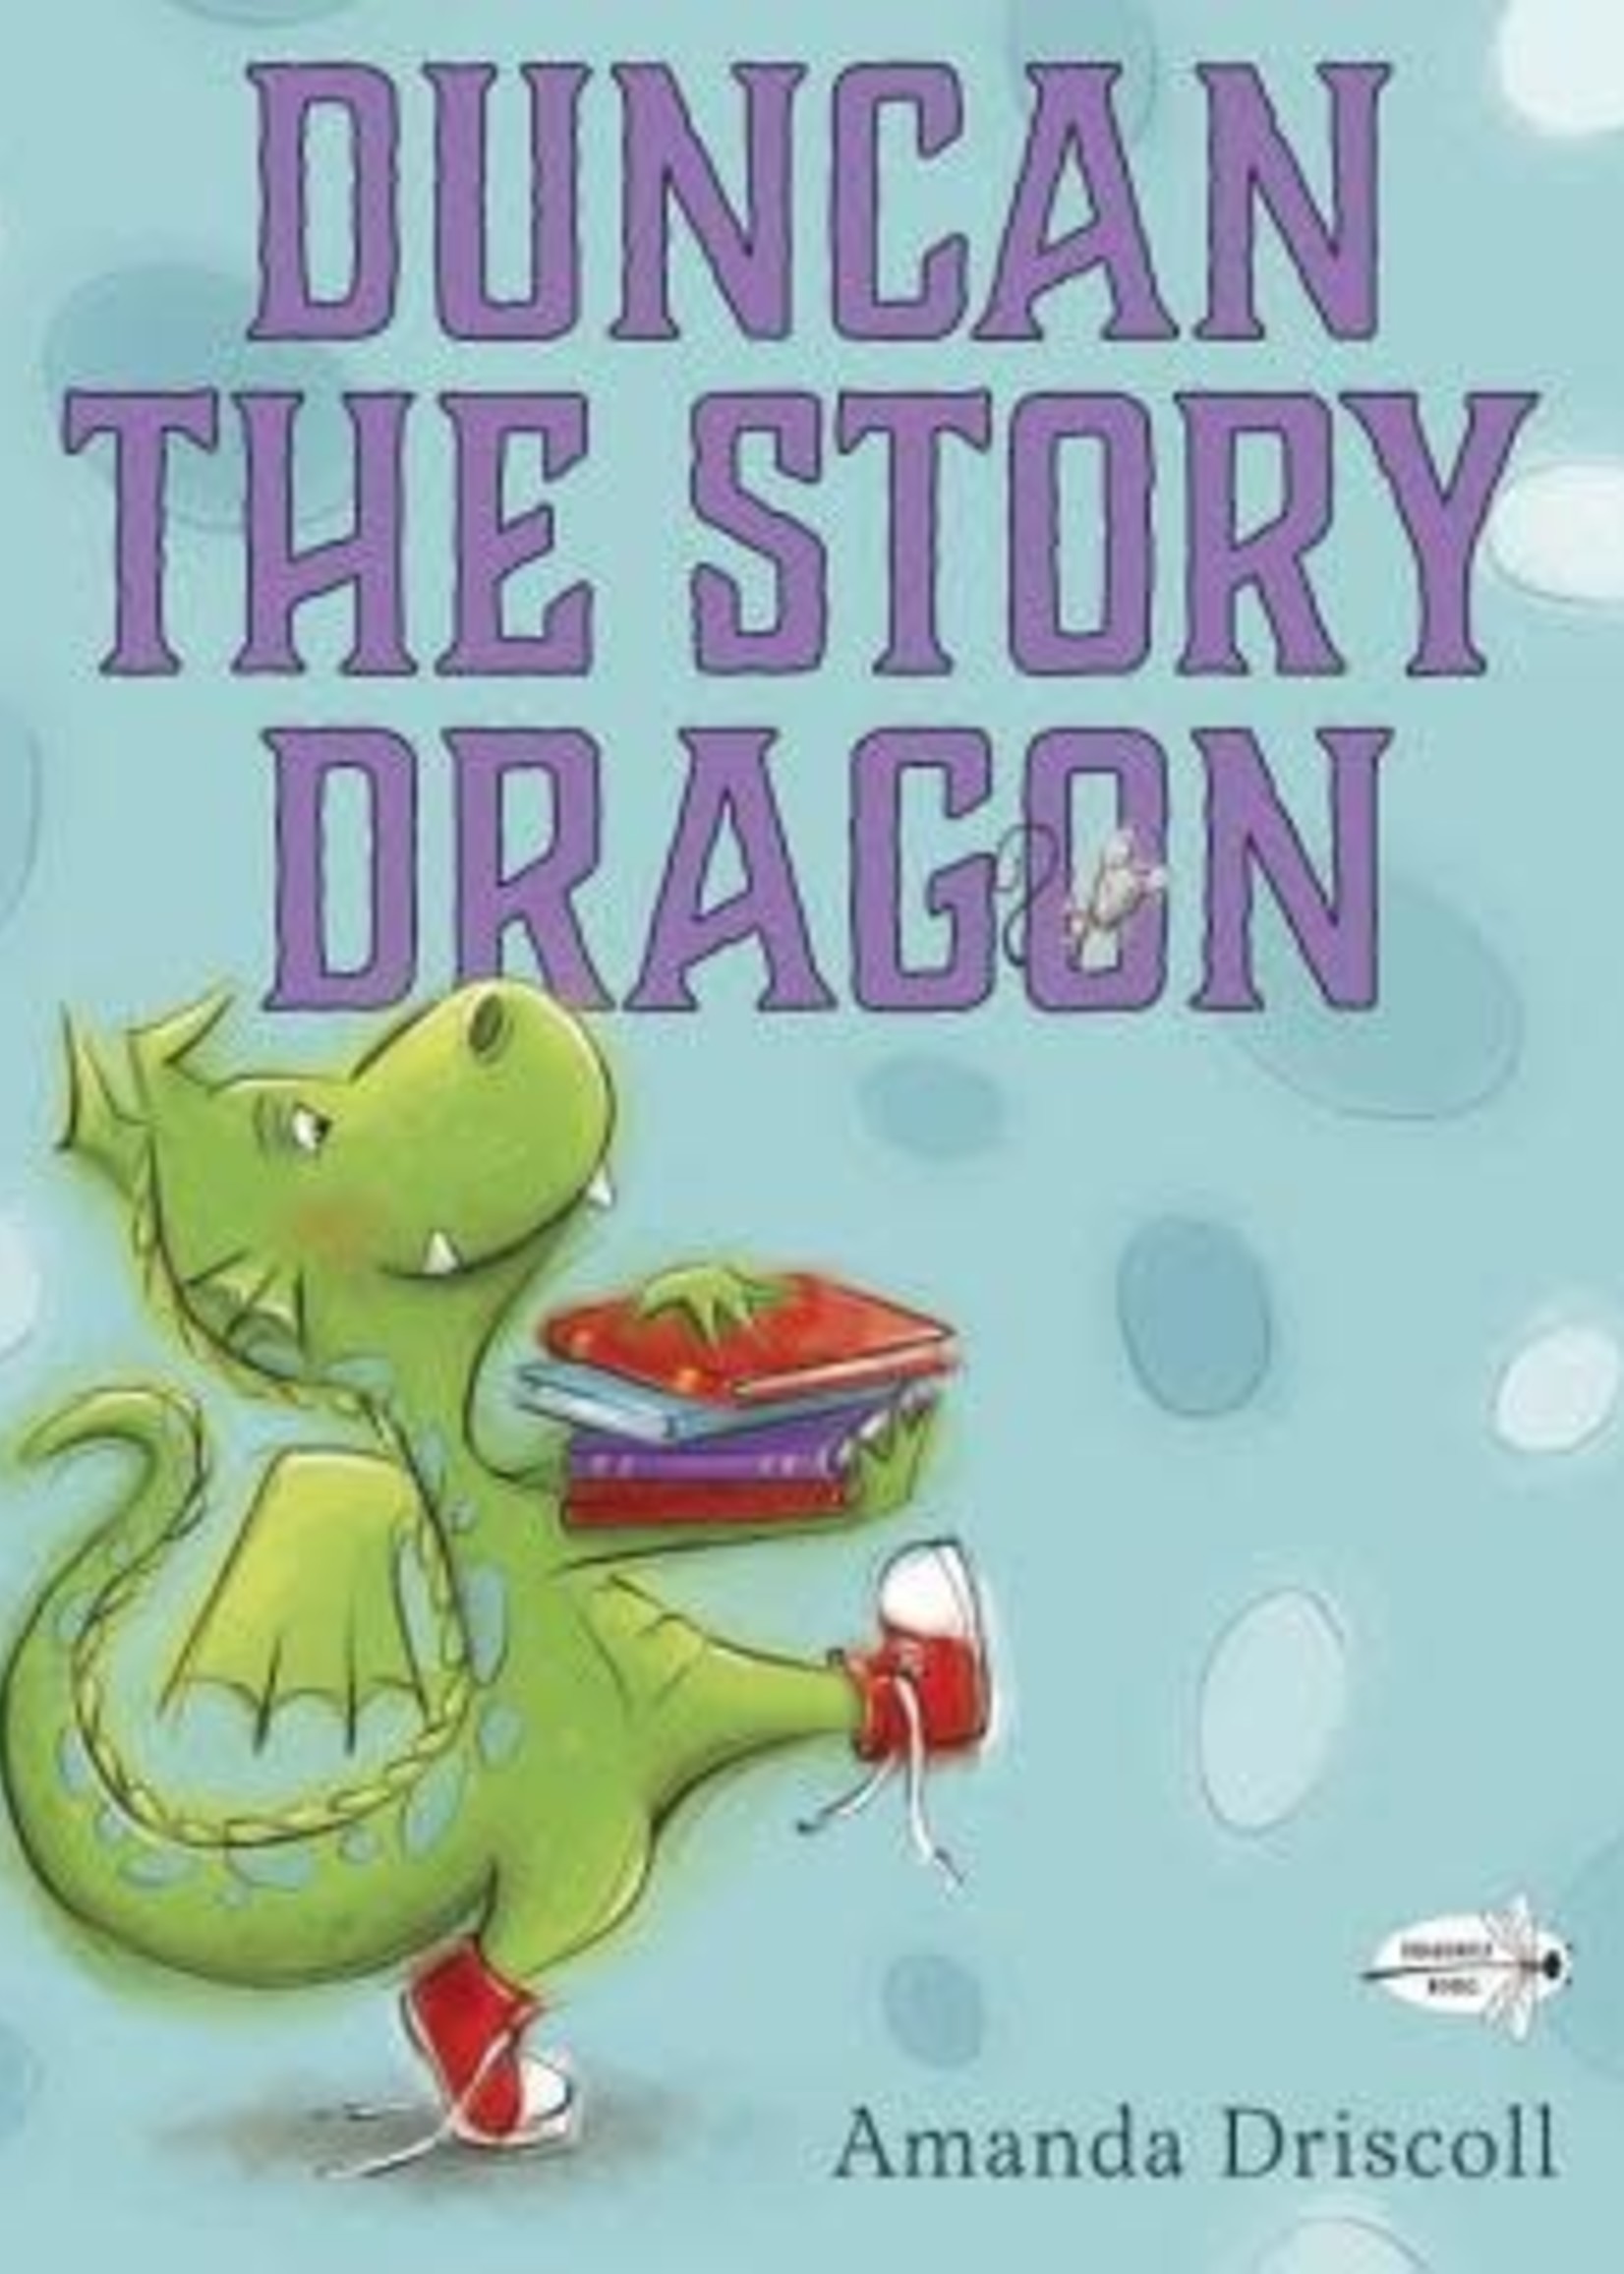 Duncan the Story Dragon by Amanda Driscoll